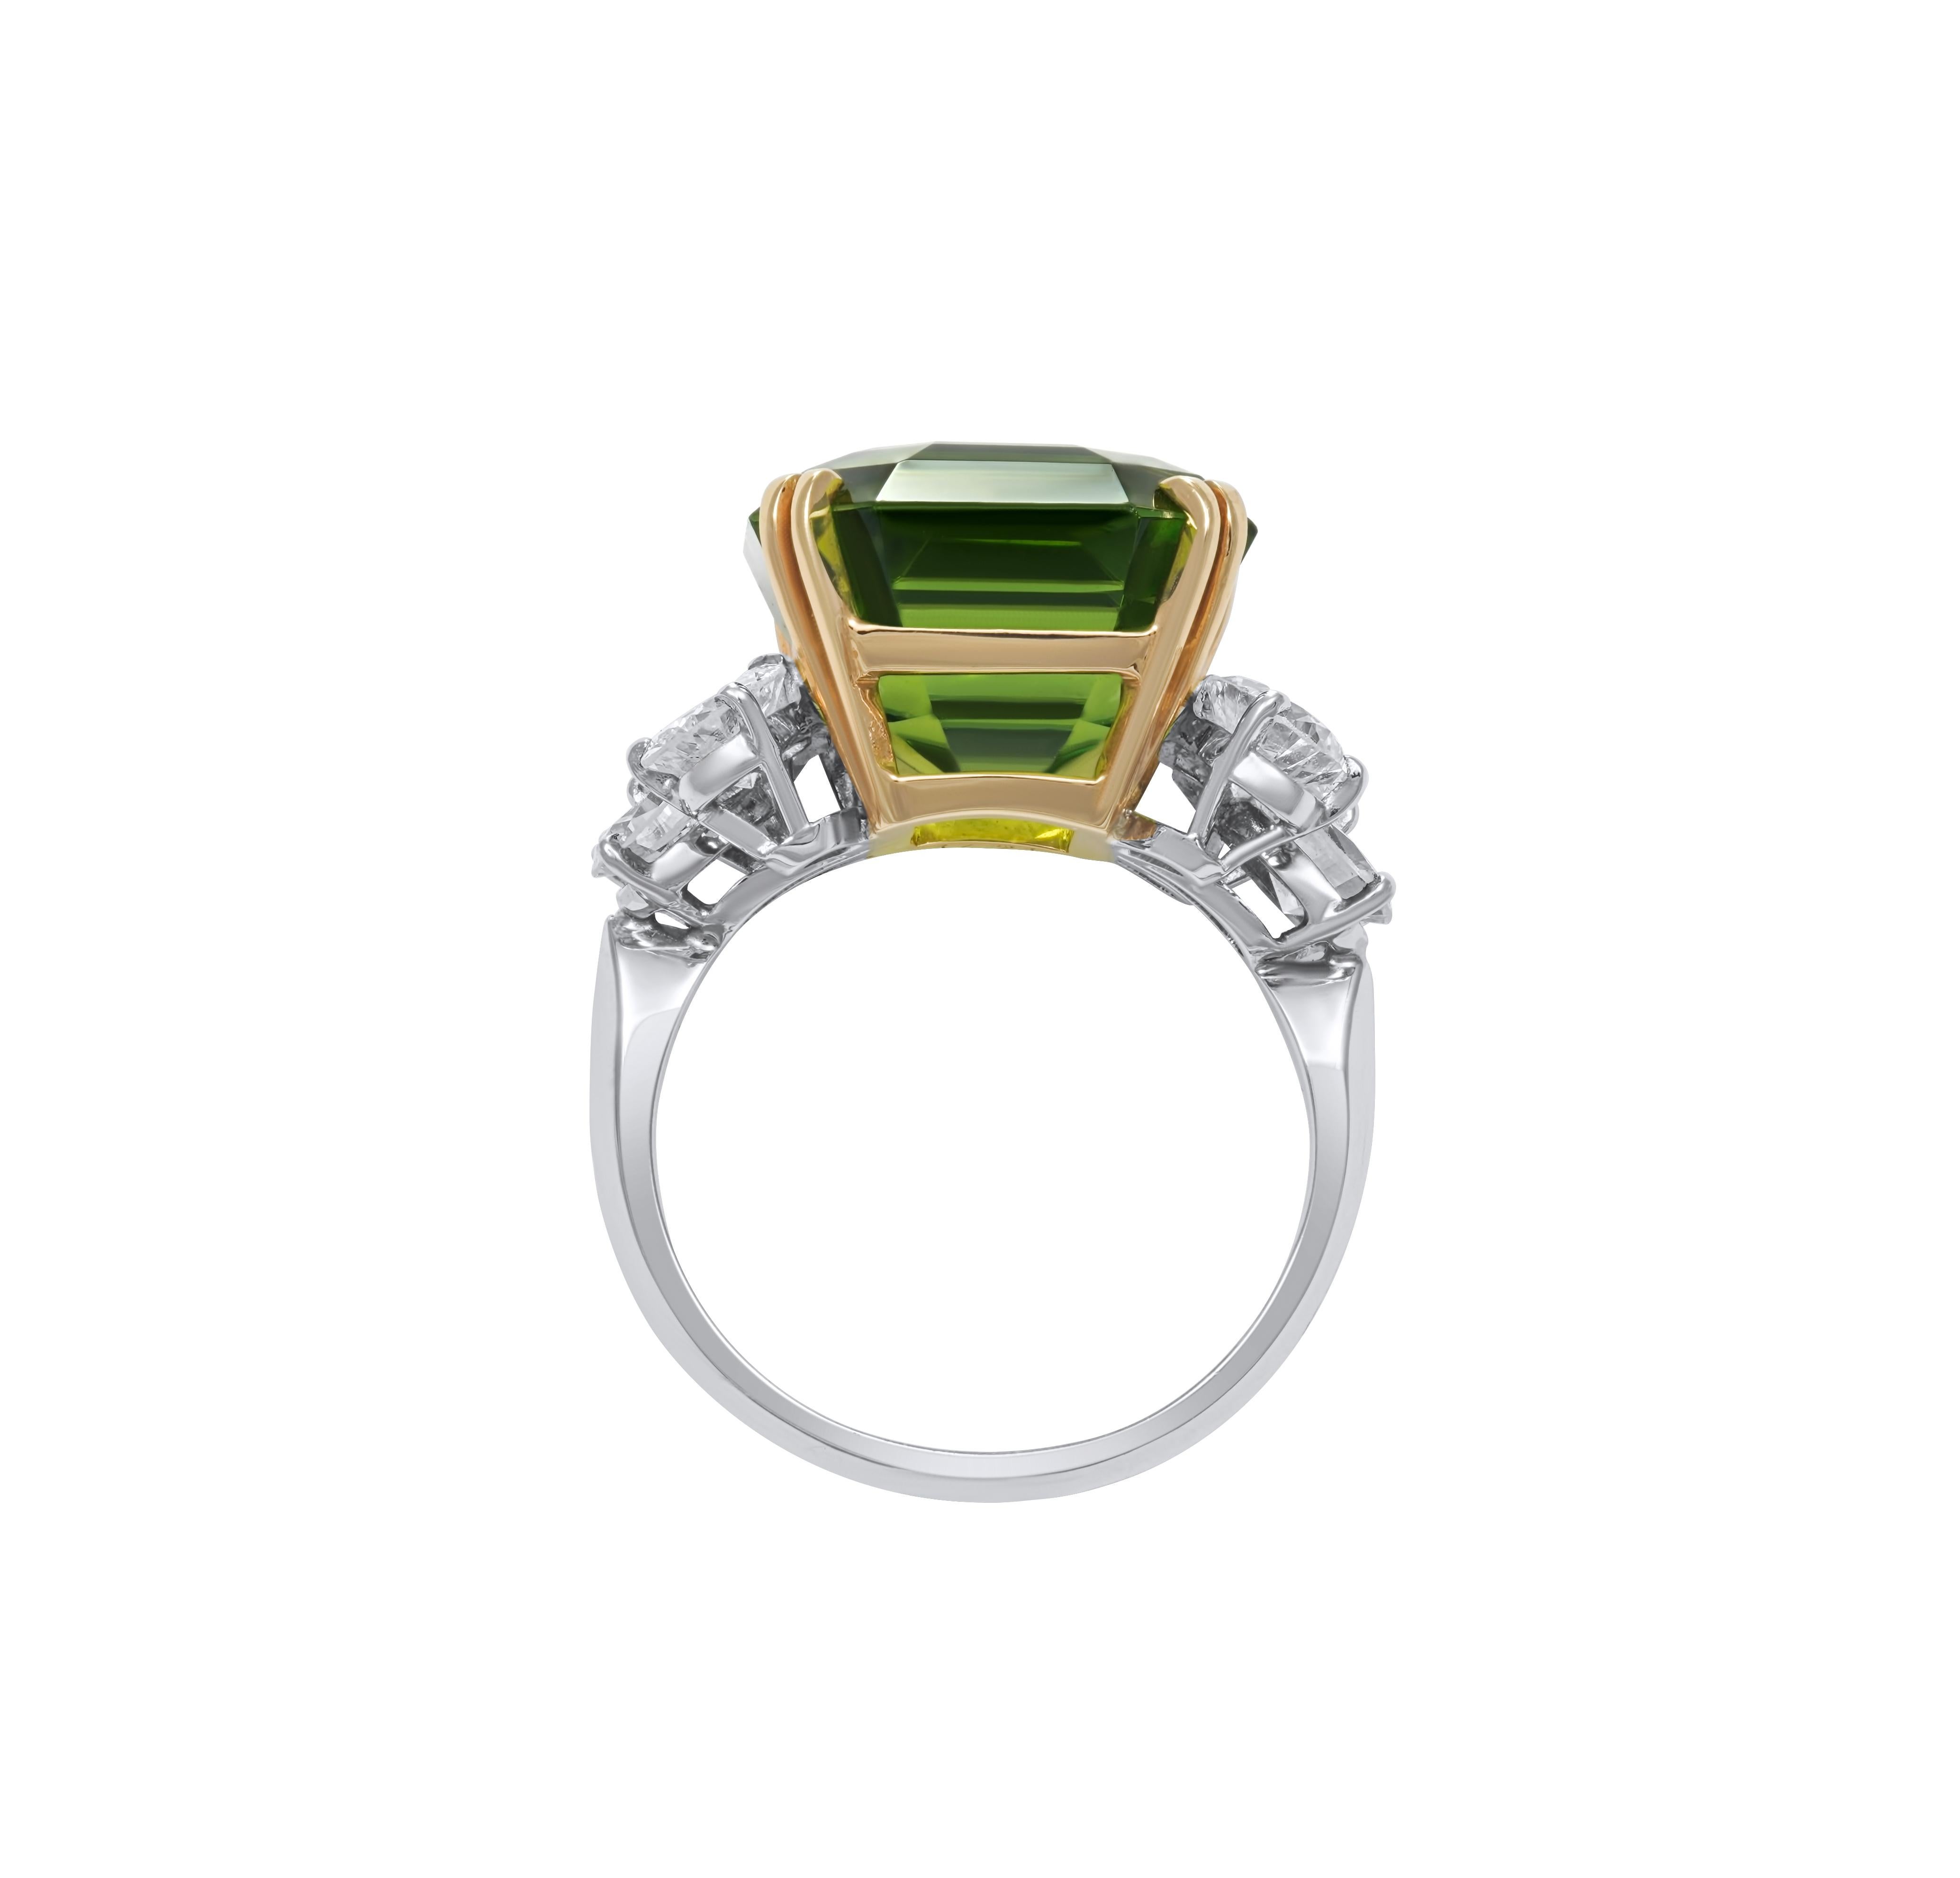 Ring in platinum and yellow gold set with a beautiful 14,81 carats peridot and 2,26 carats of diamonds. 
weight : 9,5 grs
Ring size : 54 (French size) the ring is resizable id needed. 